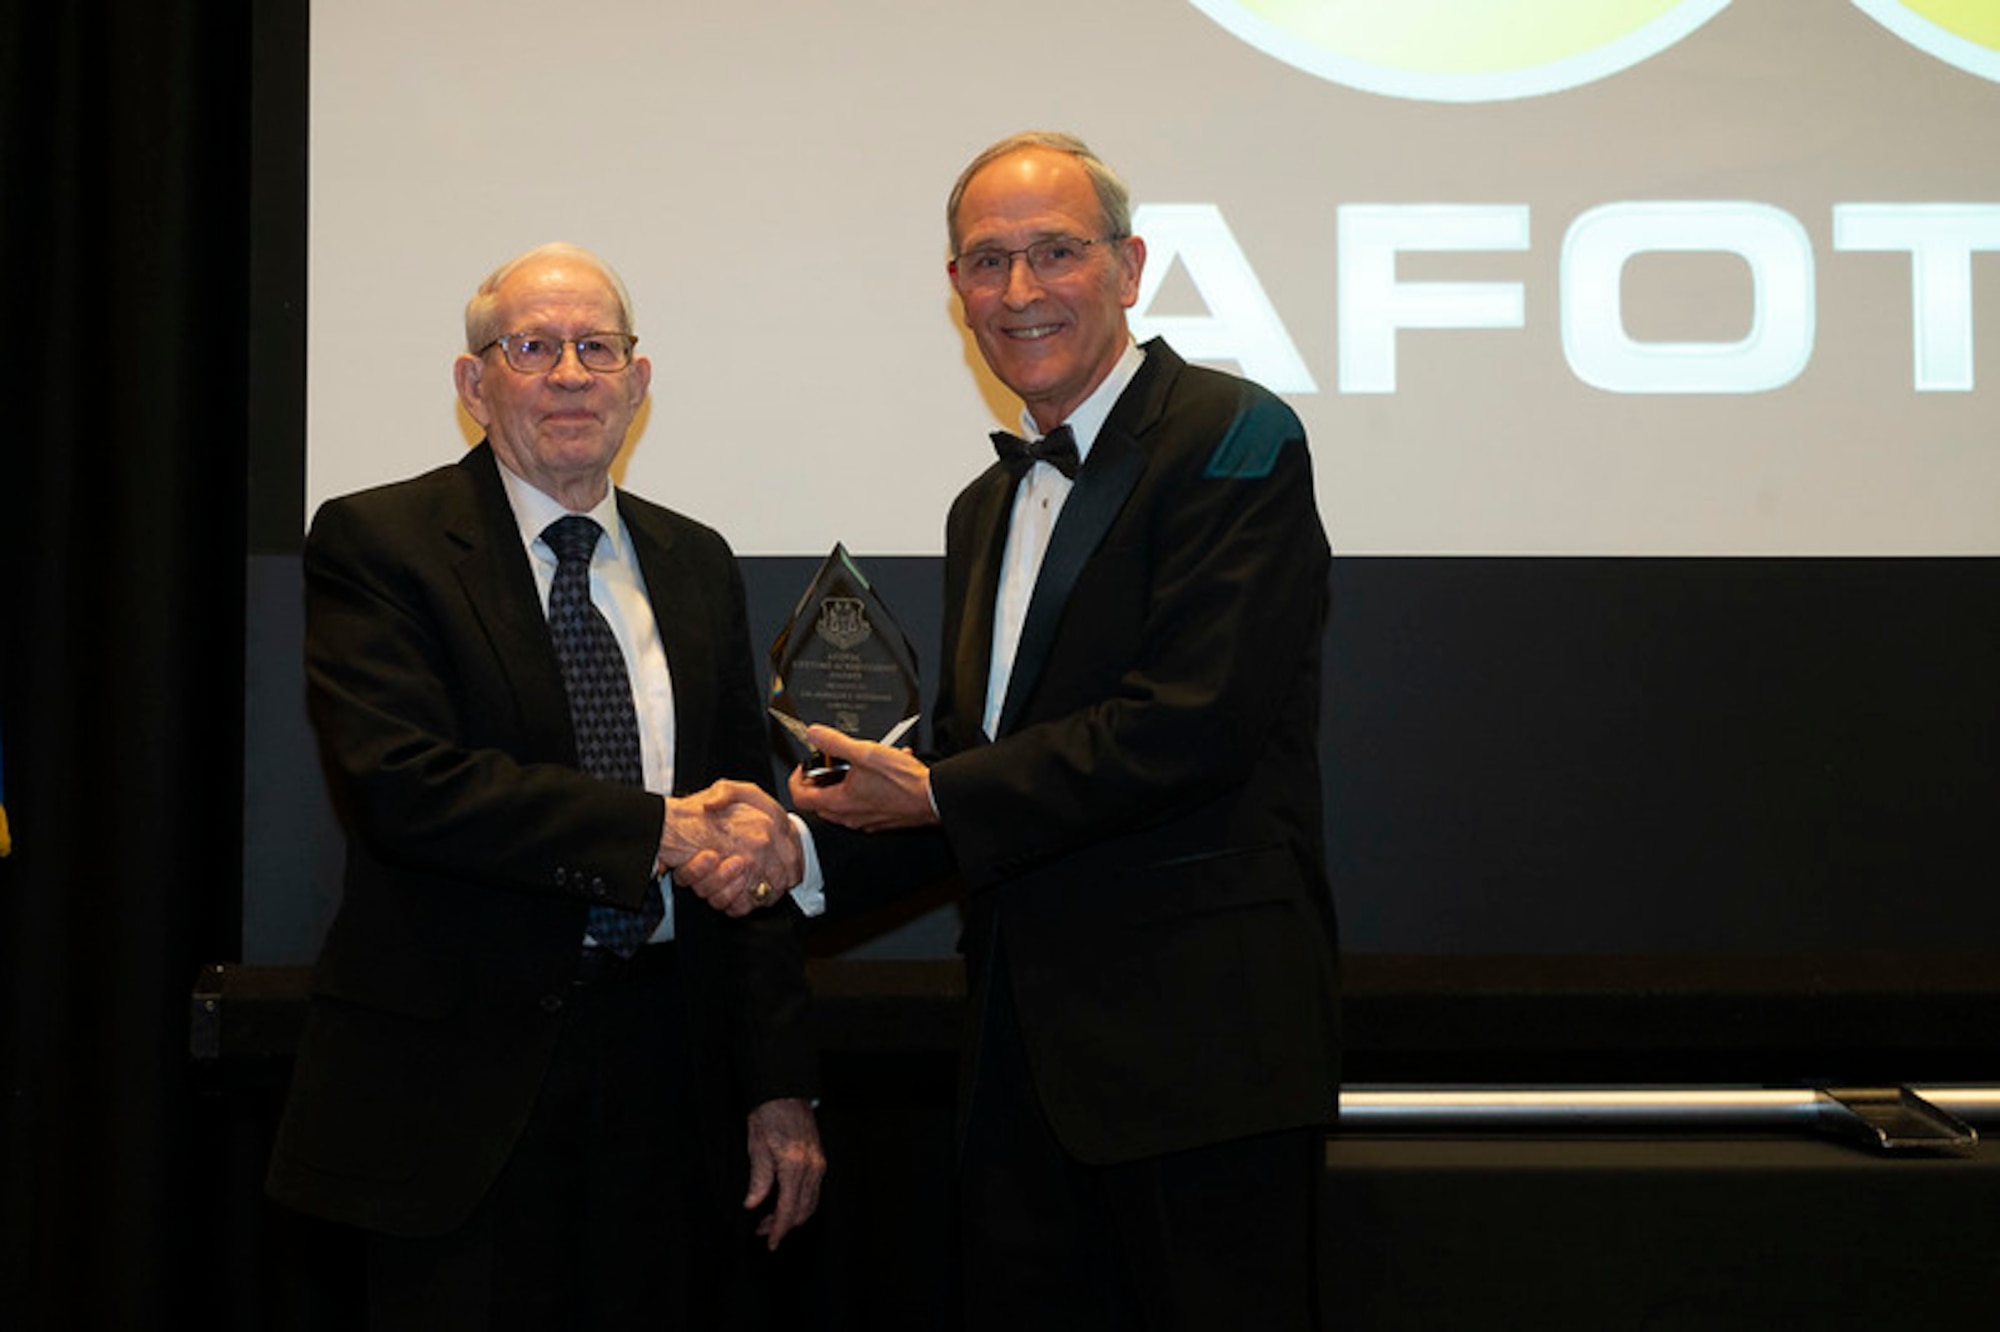 (Right) Jeffrey Olinger, Air Force Operational Test and Evaluation Center Technical Advisor presents the AFOTEC Lifetime Achievement Award to Dr. Marion Williams. Dr. Williams served as AFOTEC’s Chief Scientist and Technical Director from 1974 to 2005.